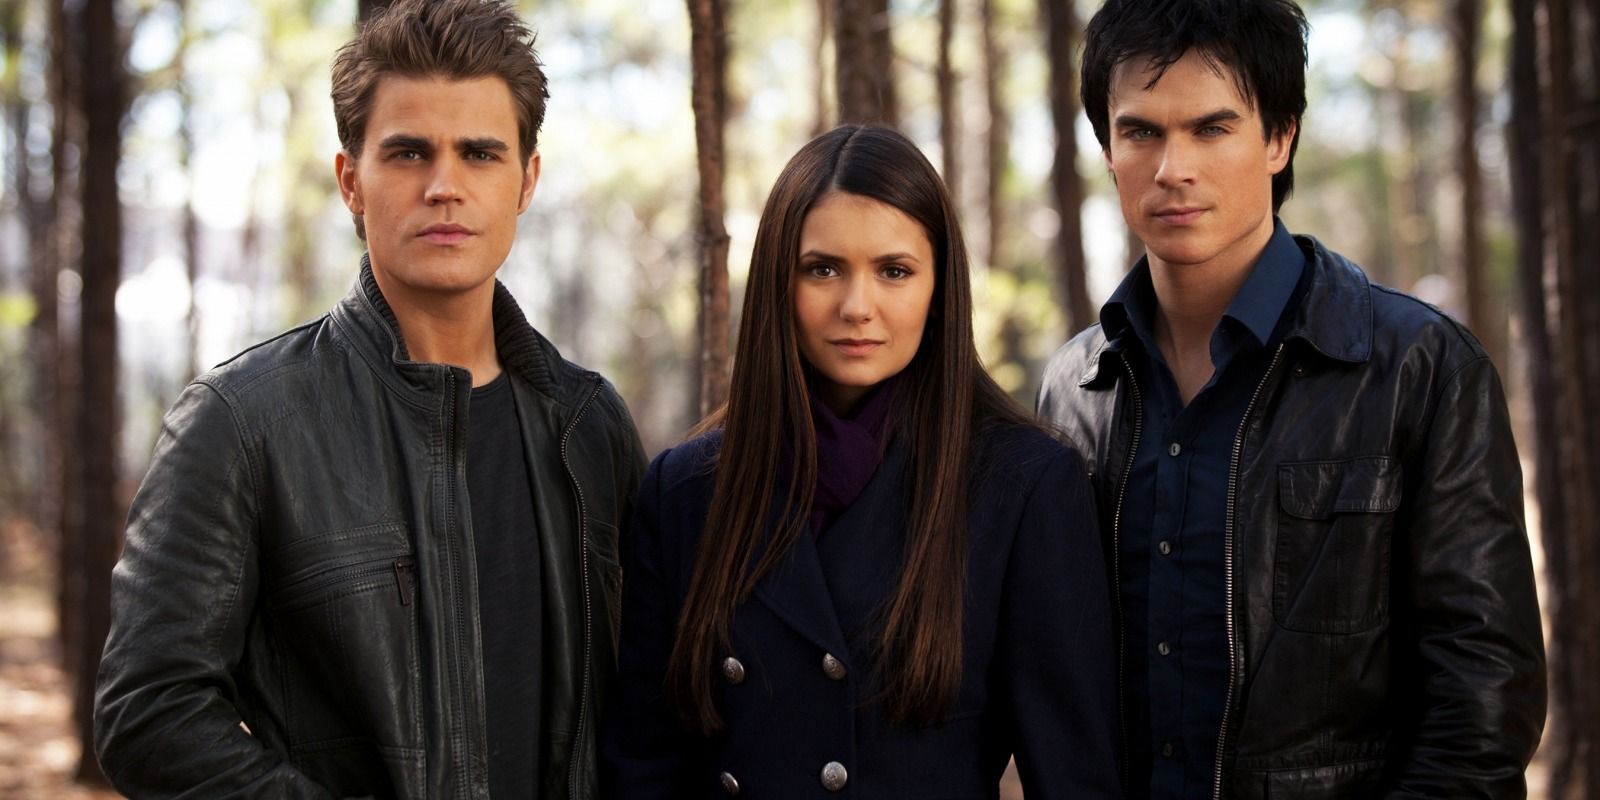 The Vampire Diaries 5 Things About Vampires It Got Right (& 5 Things It Got Wrong)